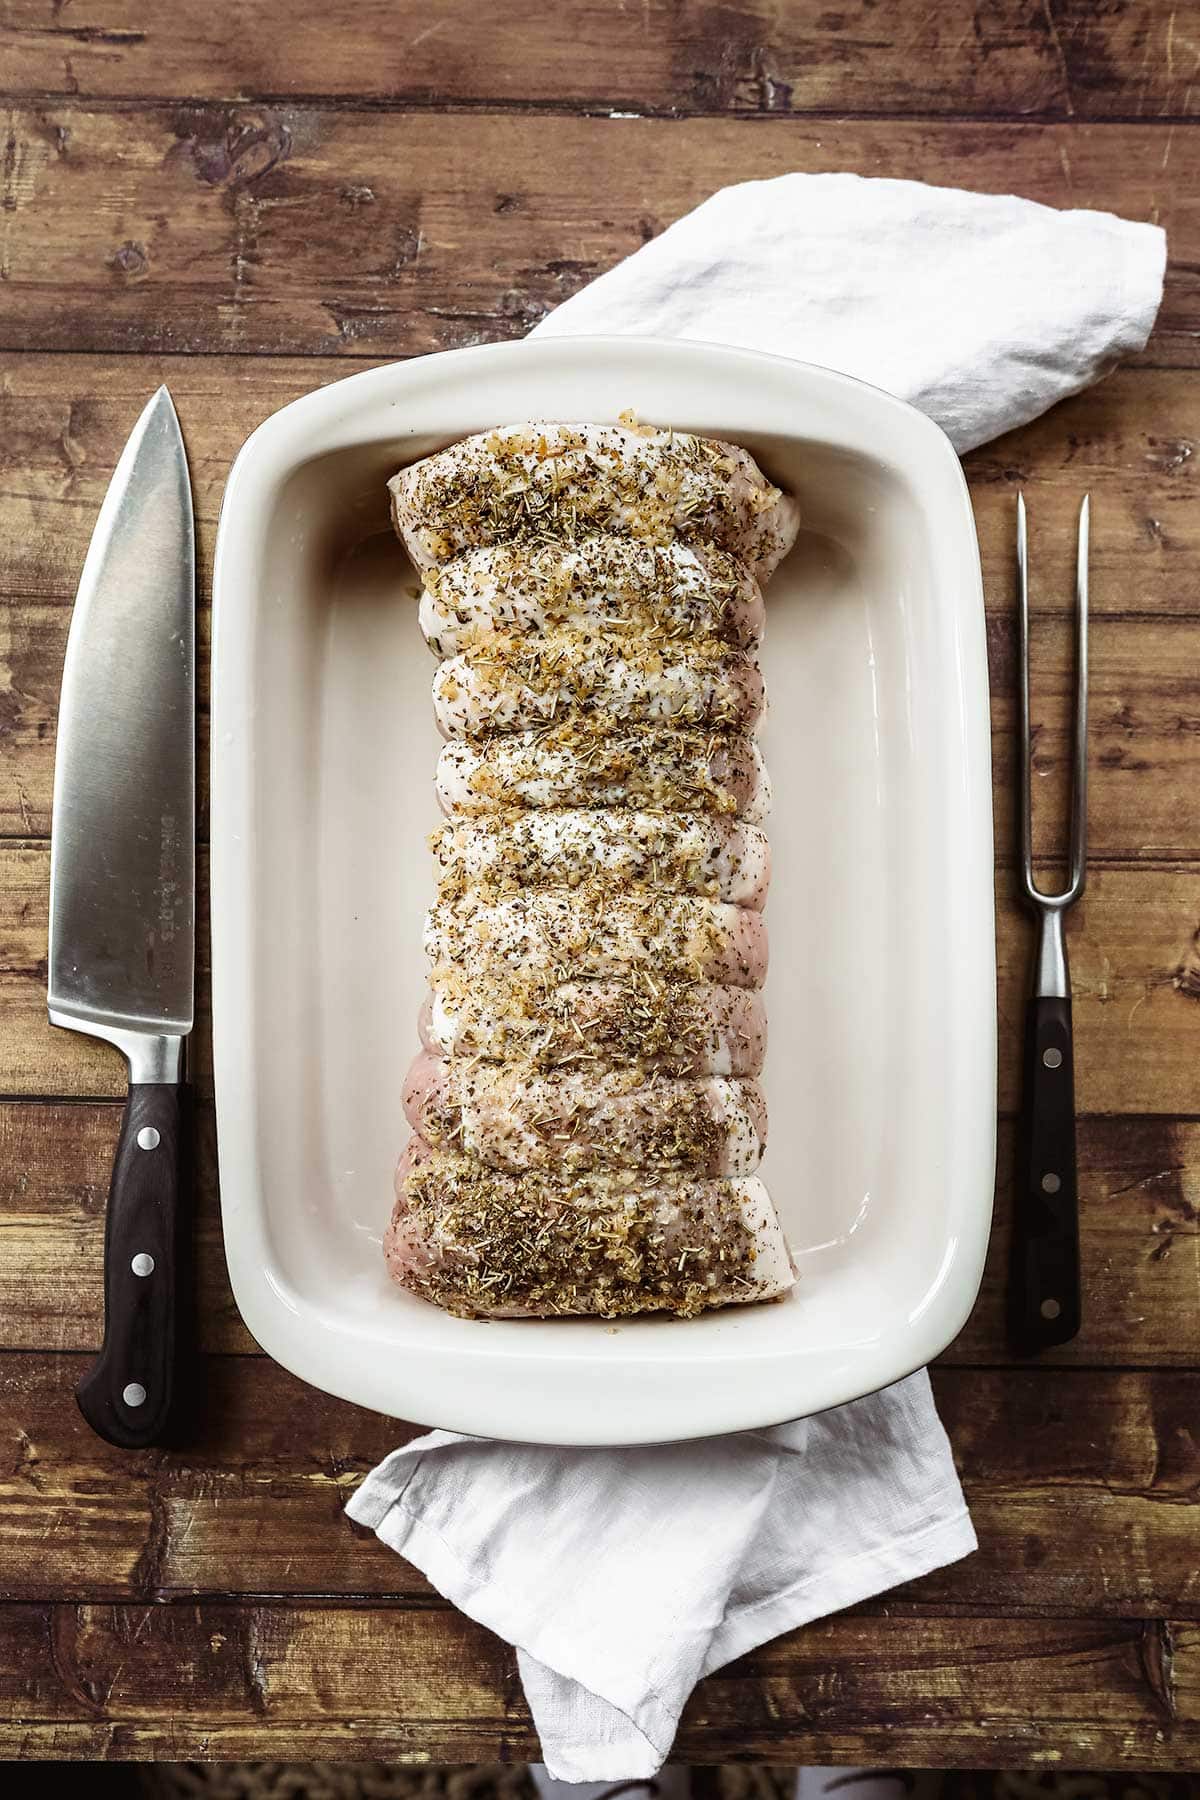 Herb Crusted Pork Loin in baking dish before baking